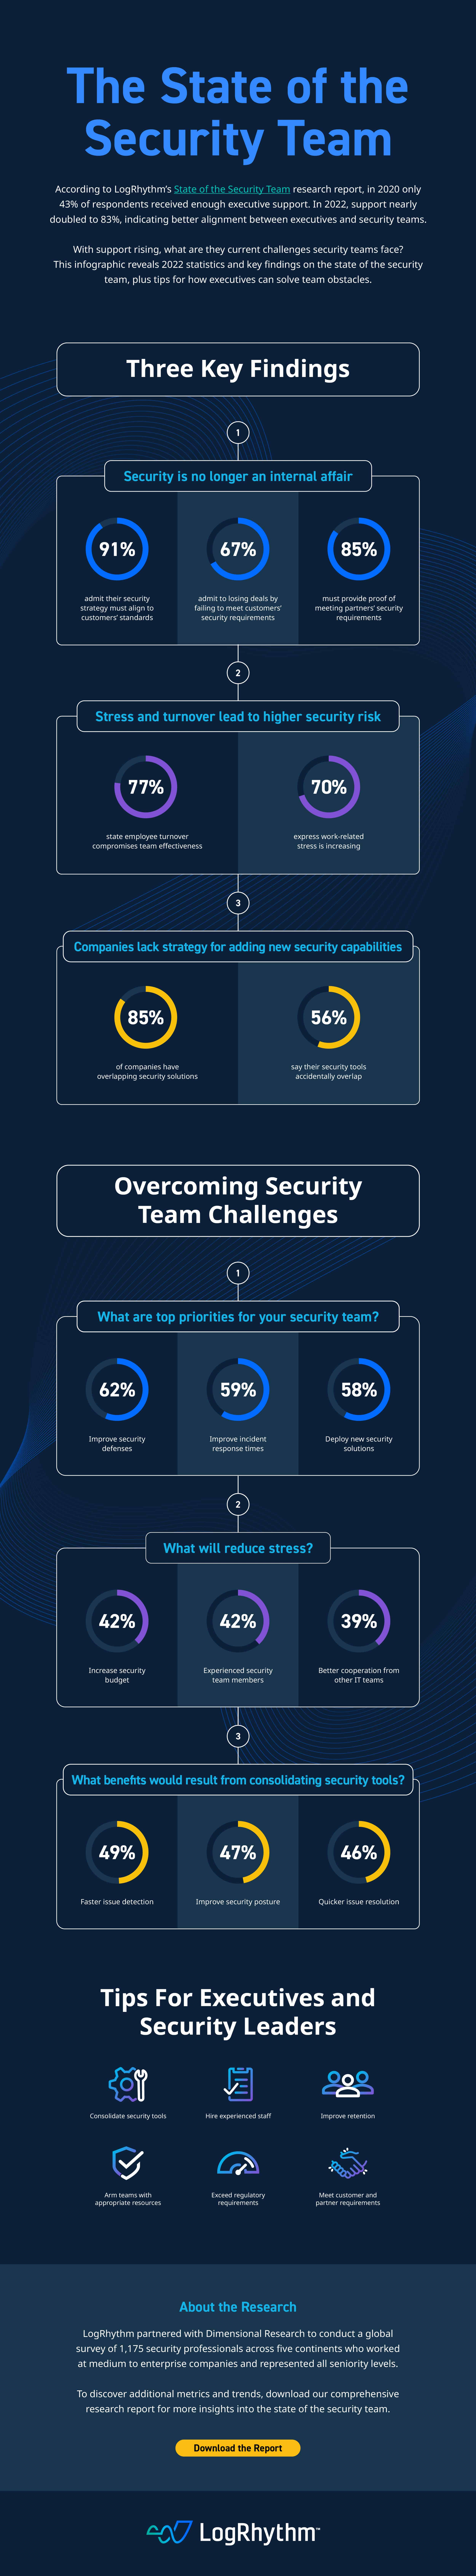 State of the Security Team infographic 